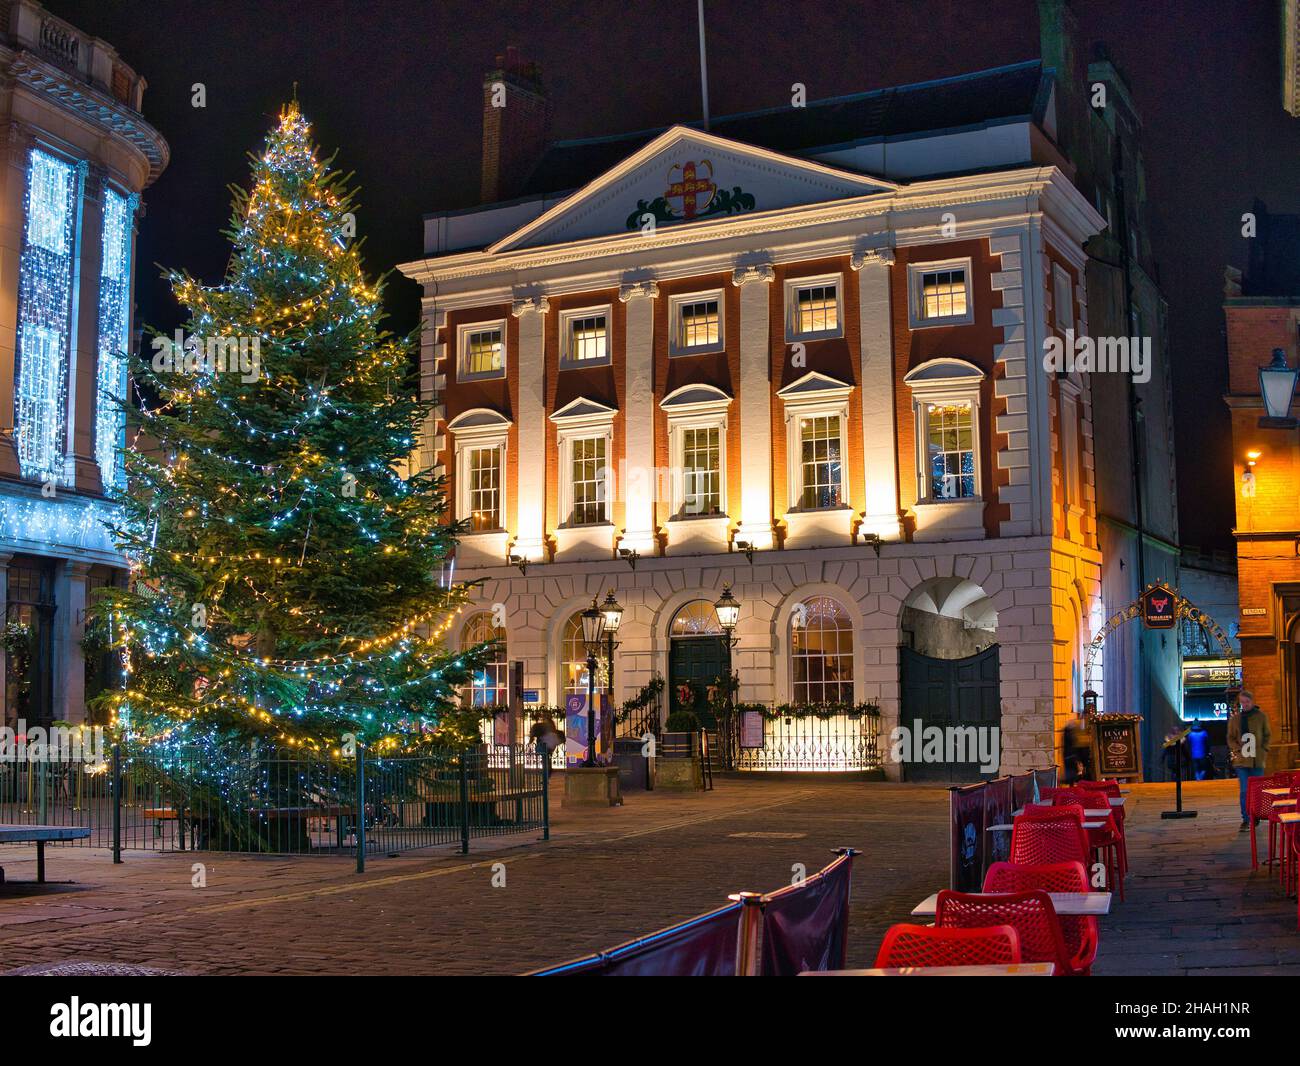 The Mansion House in York, Yorkshire, UK - the official residence of the Lord Mayor of York. Lit at night around Christmas. Stock Photo